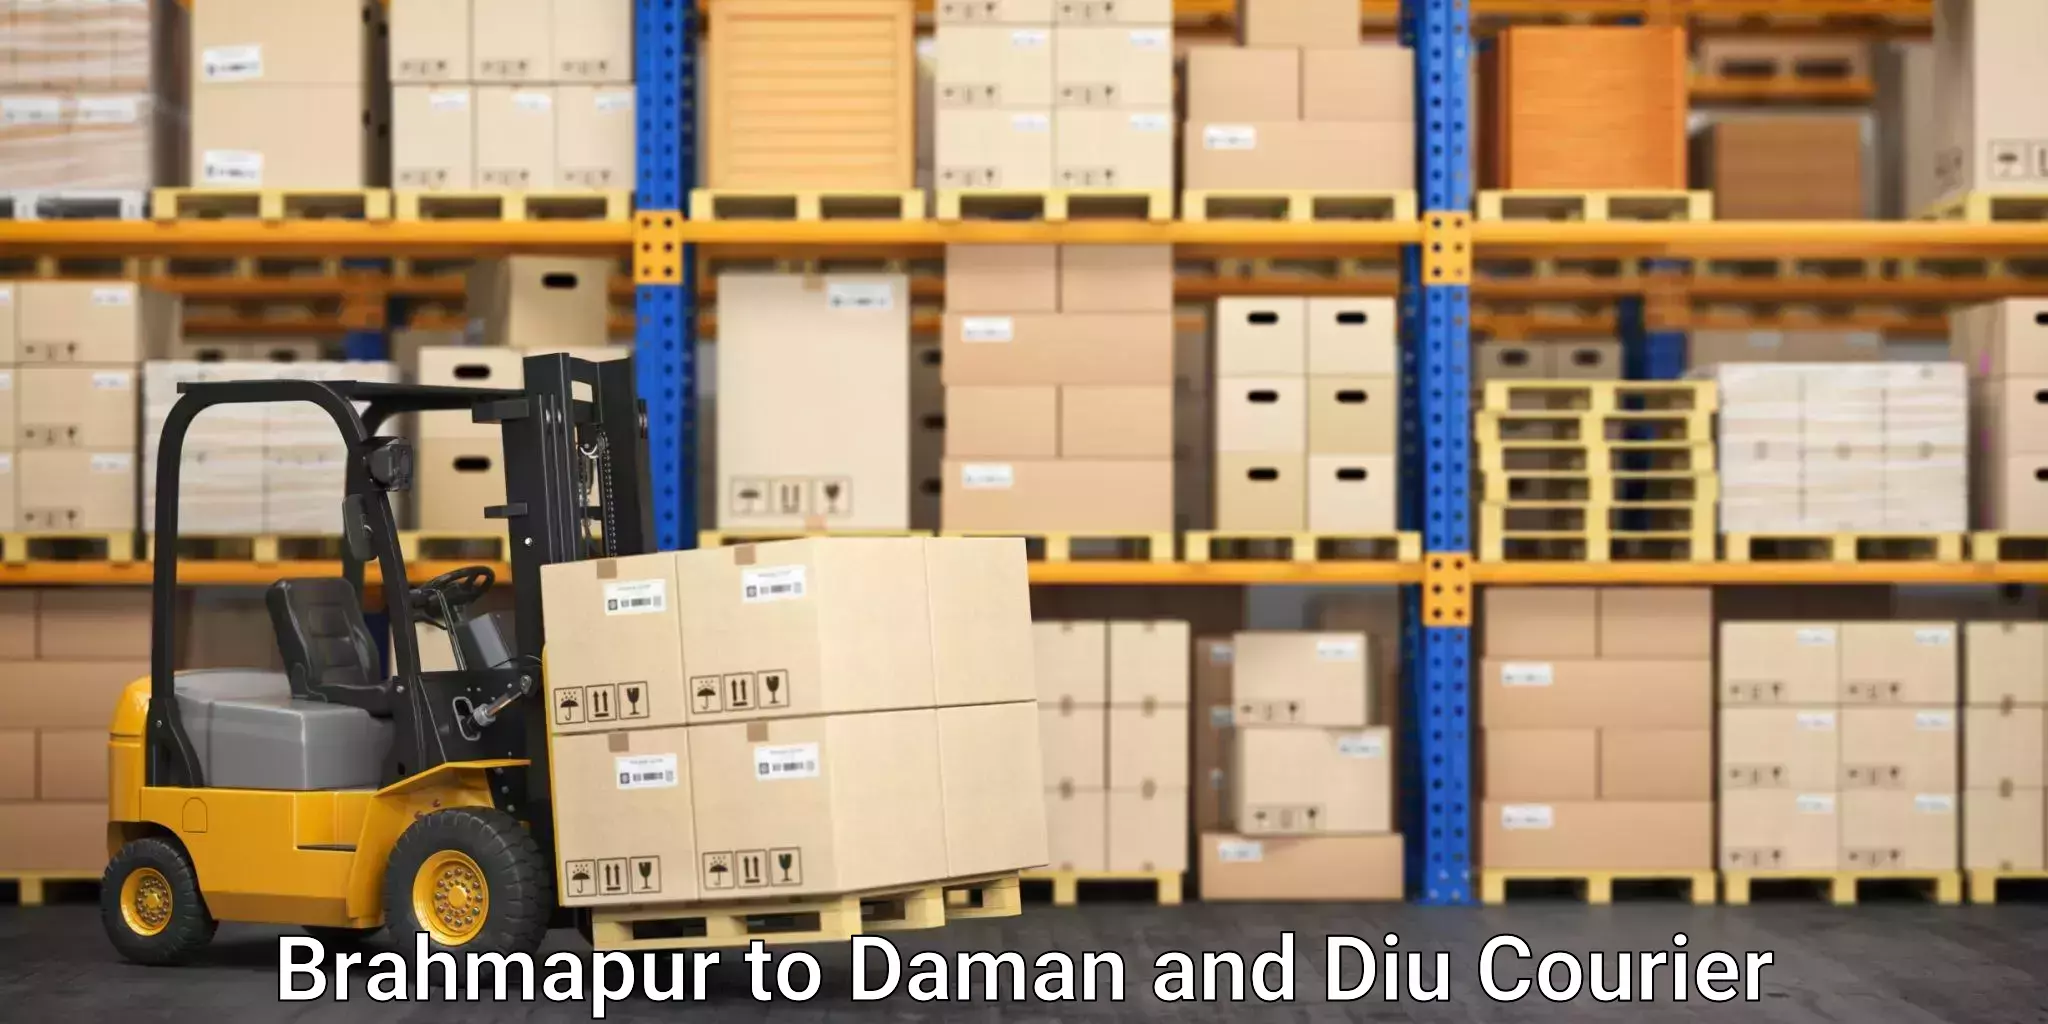 Furniture delivery service Brahmapur to Daman and Diu